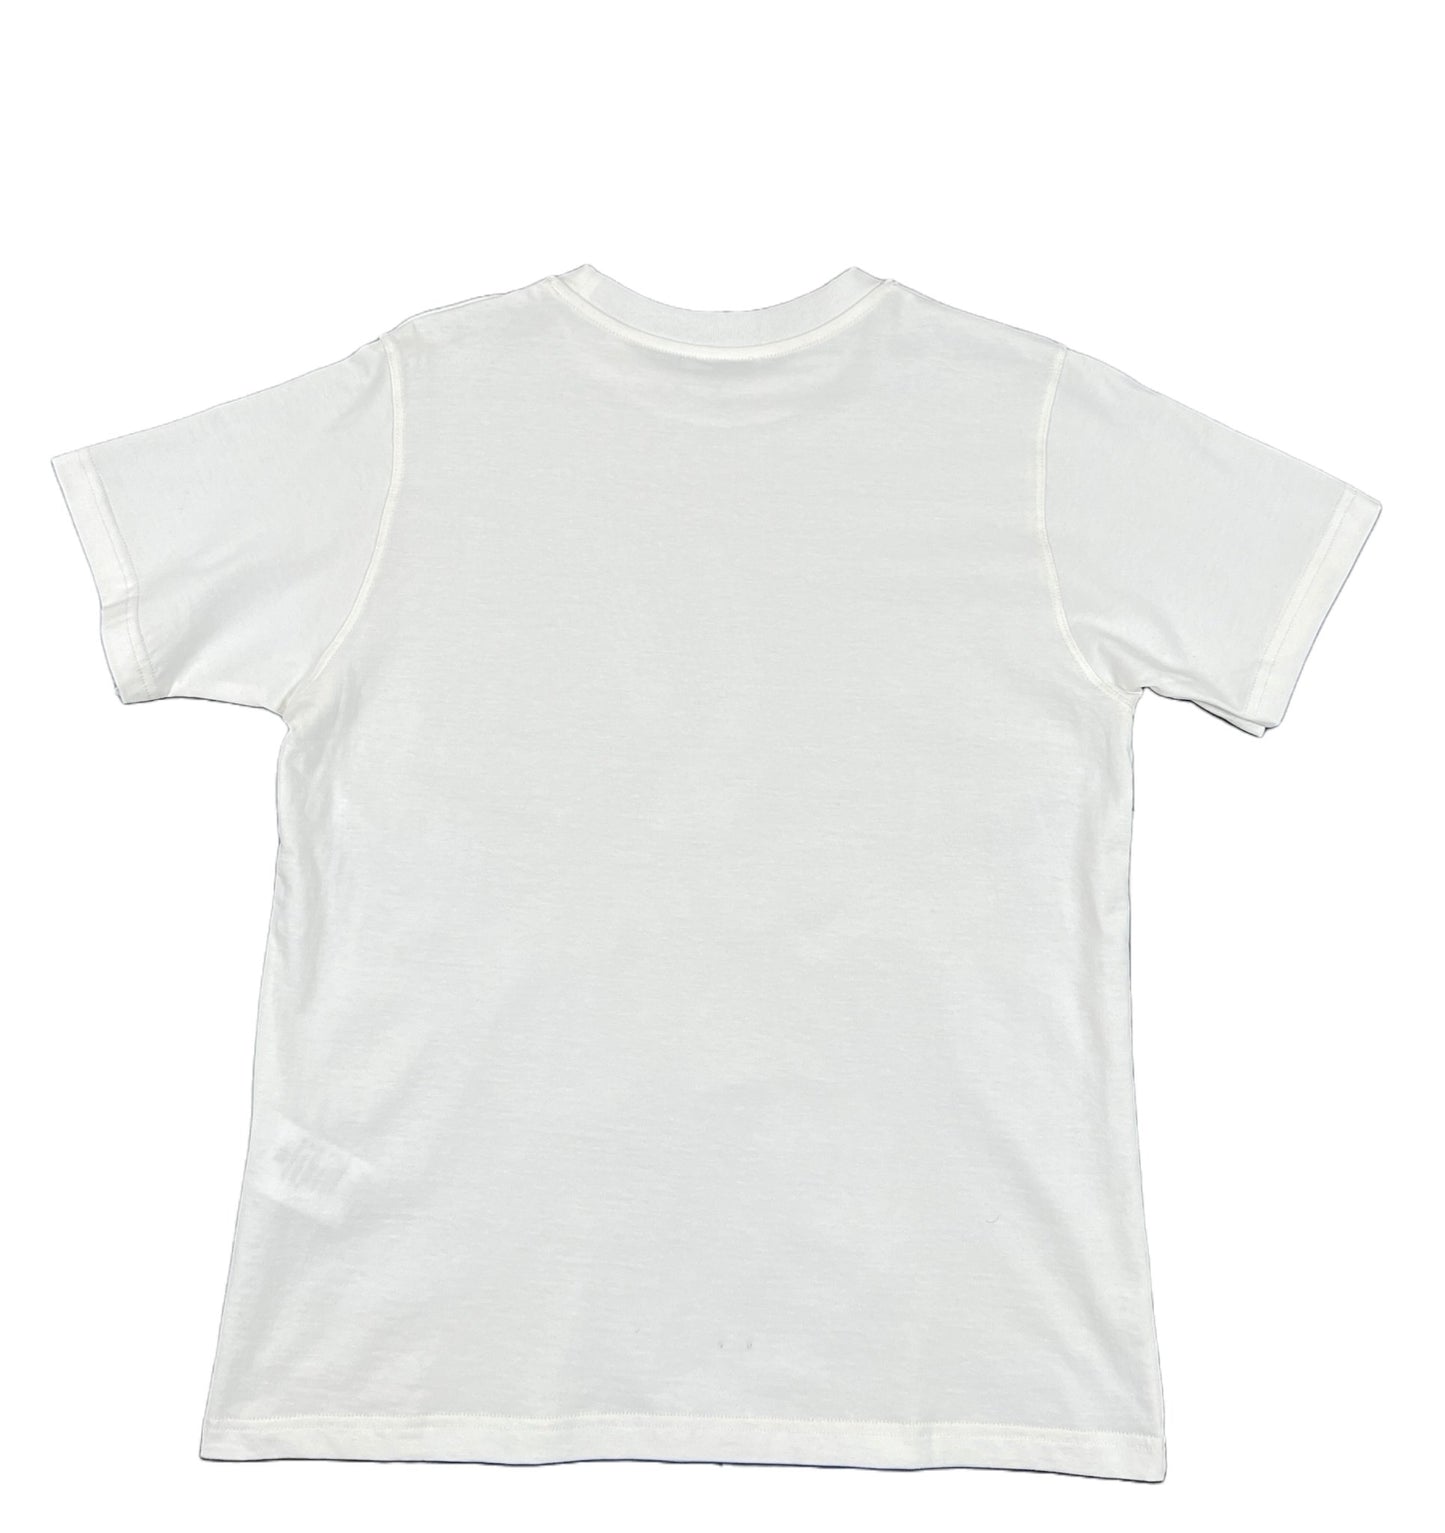 A FAMILY FIRST TF2204WH T-SHIRT ICONIC WHITE on a white background.